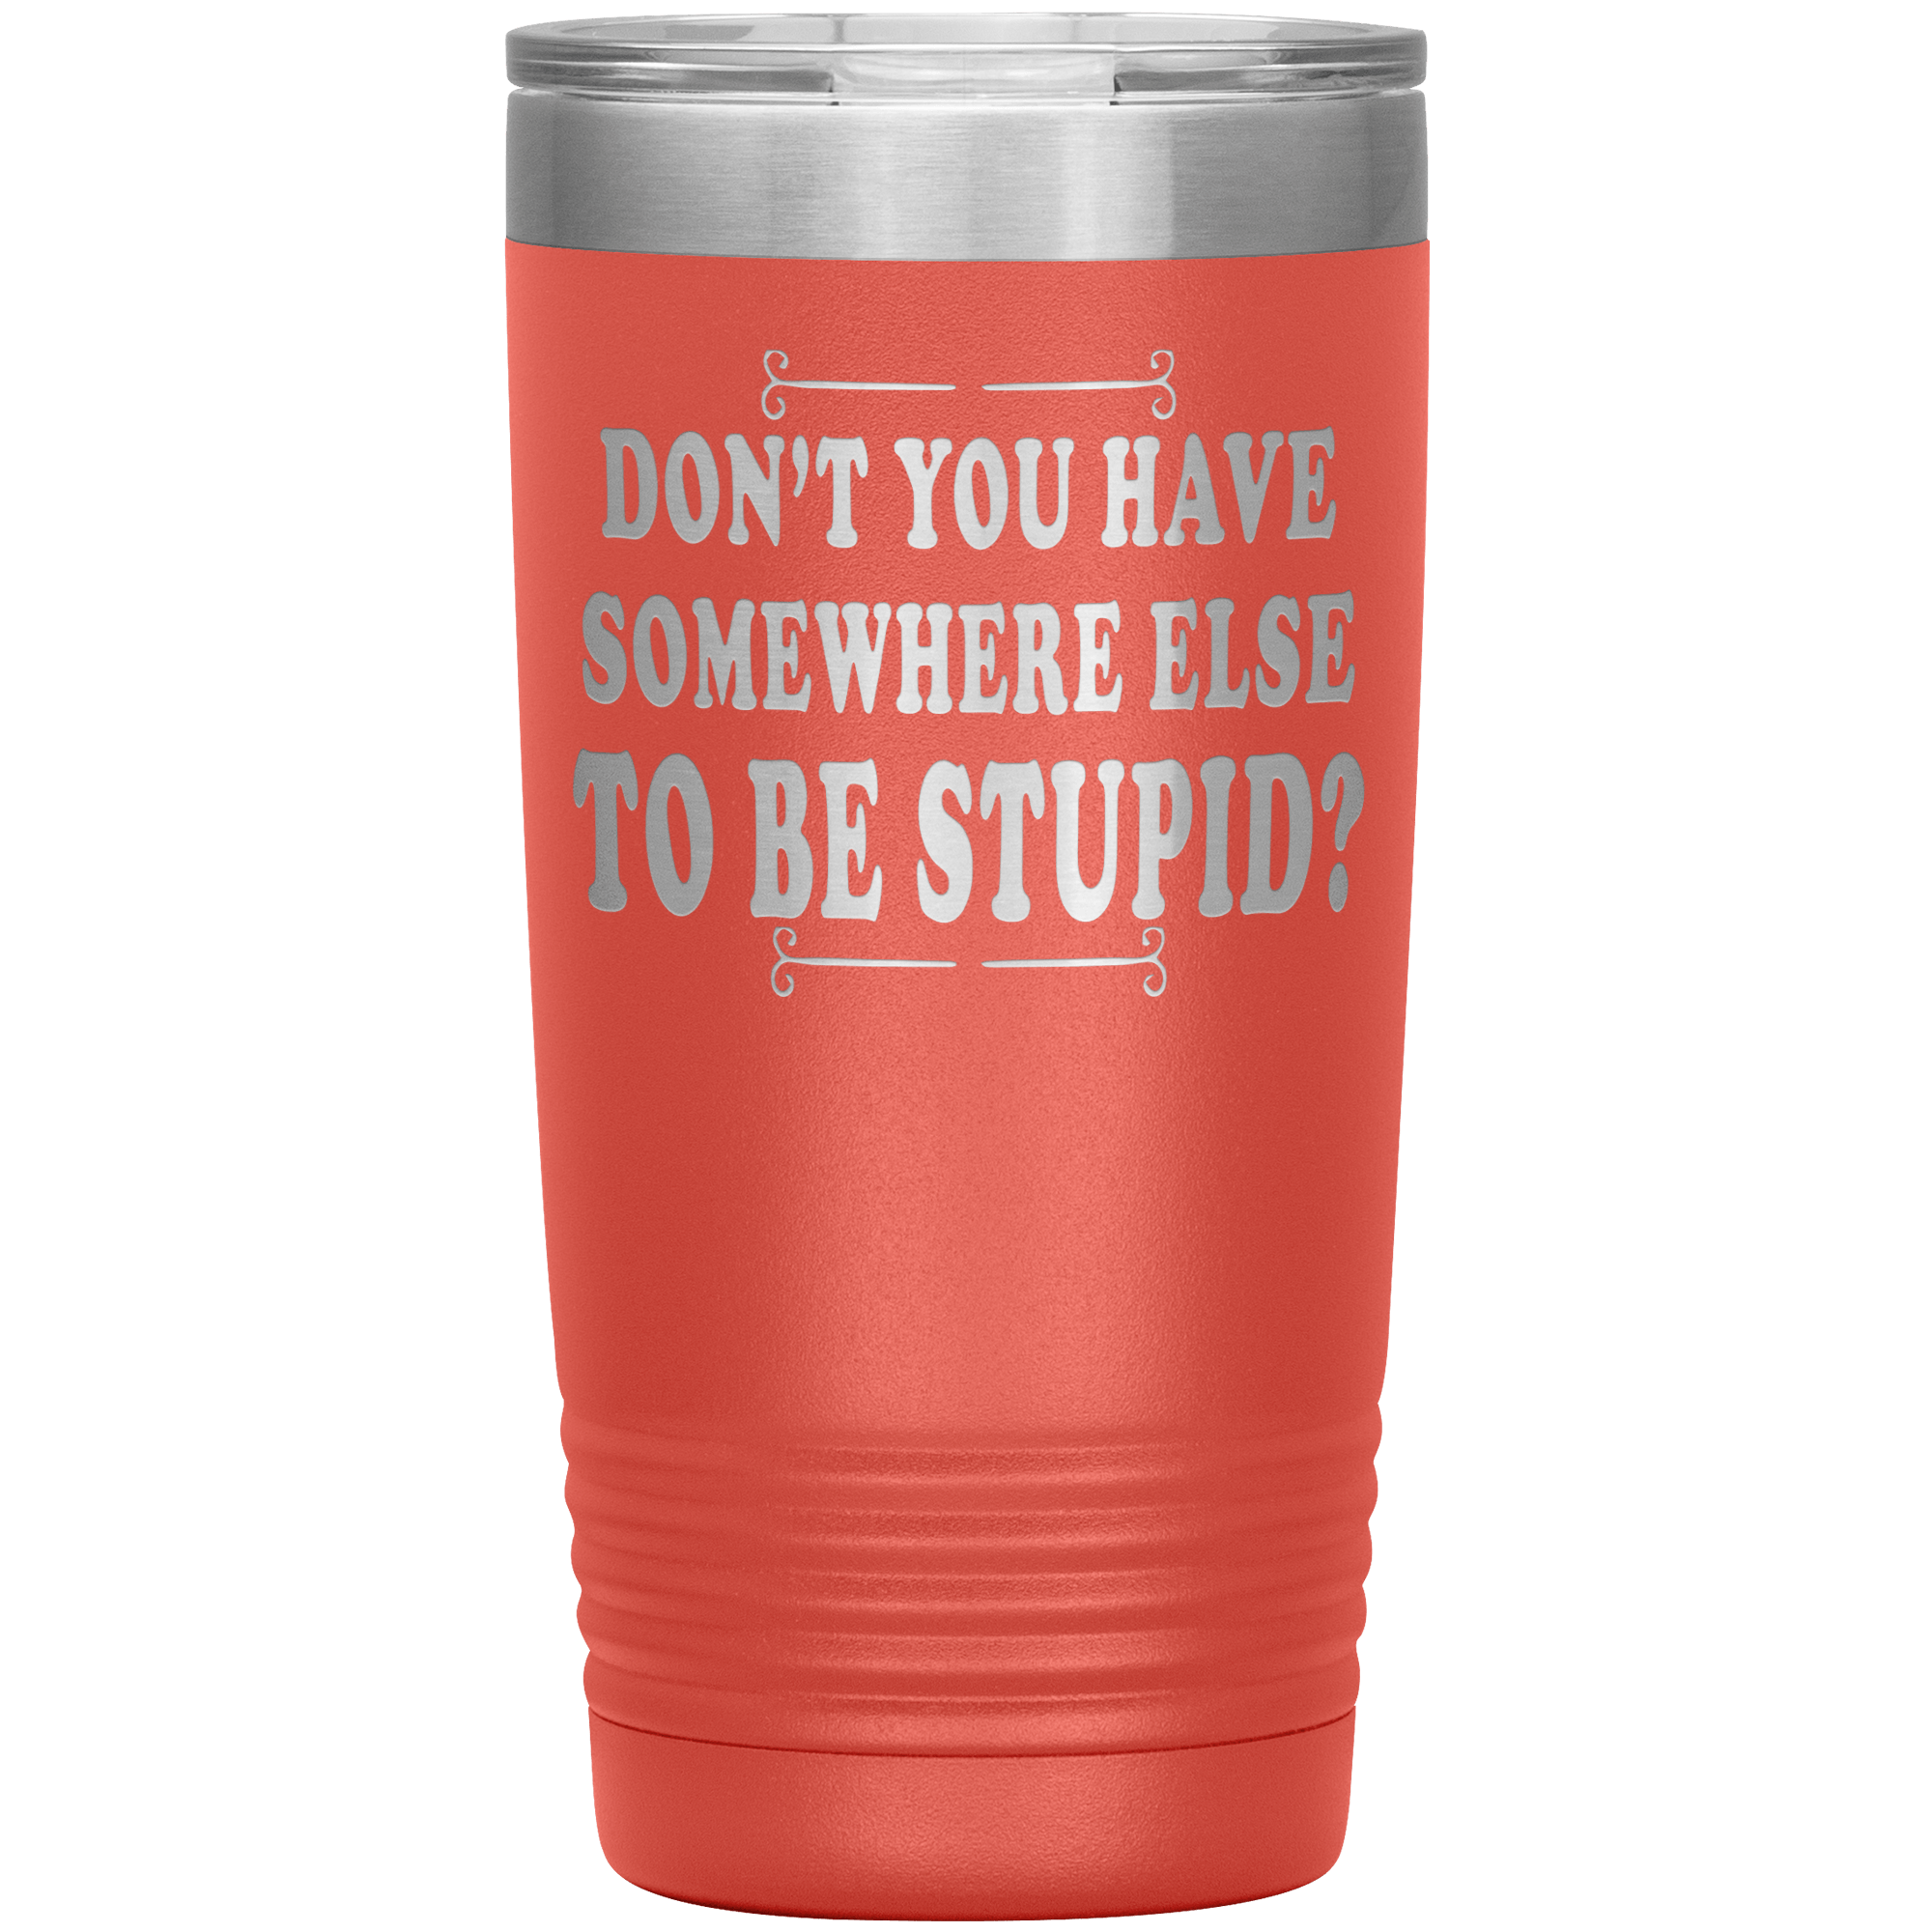 " DON'T YOU HAVE SOMEWHERE ELSE TO BE STUPID " TUMBLER